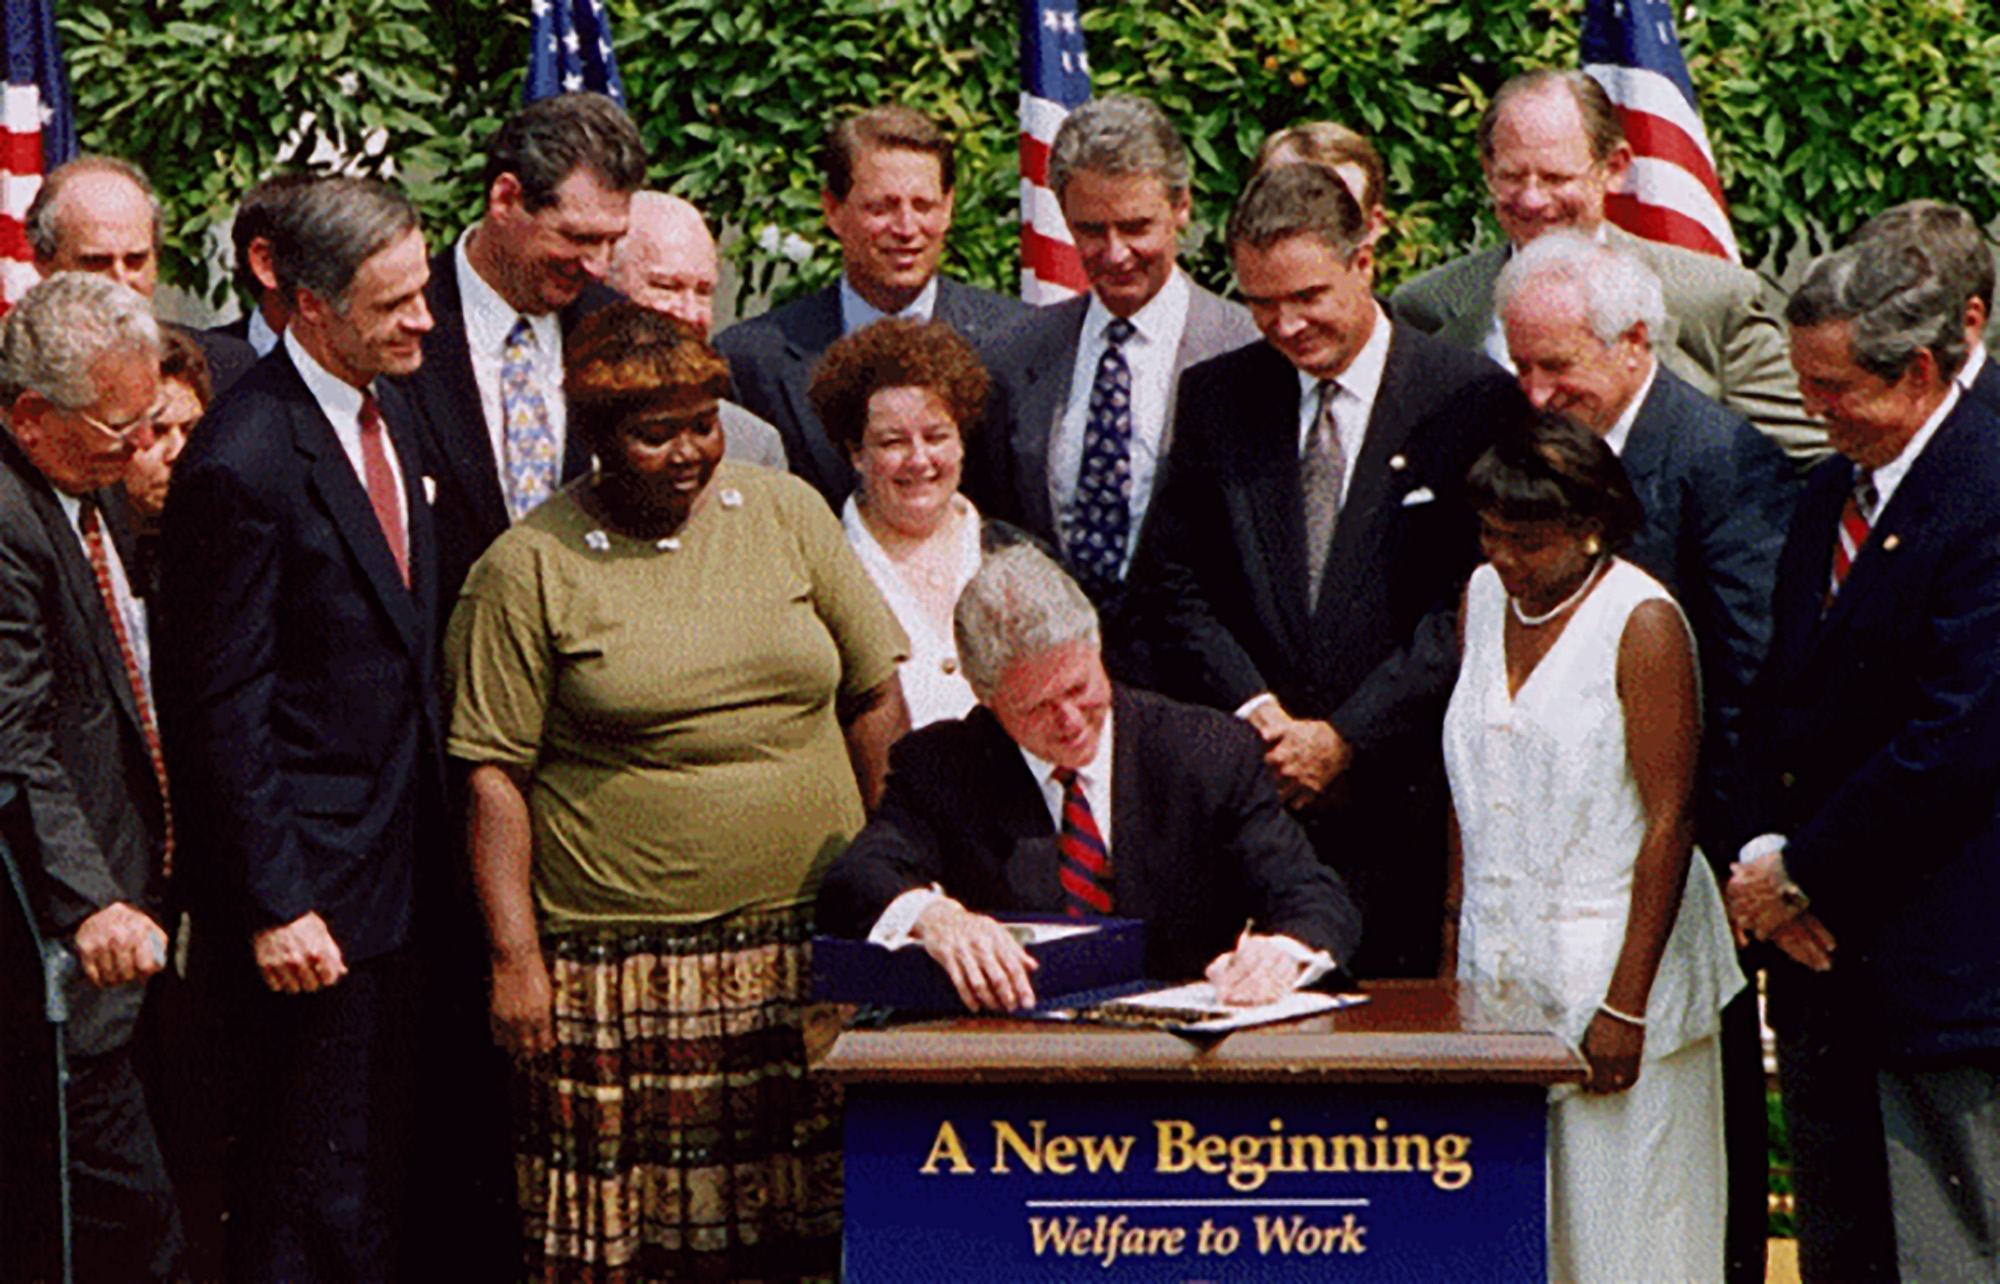 Lillie Harden stands alongside President Bill Clinton as he signs welfare reform into law.